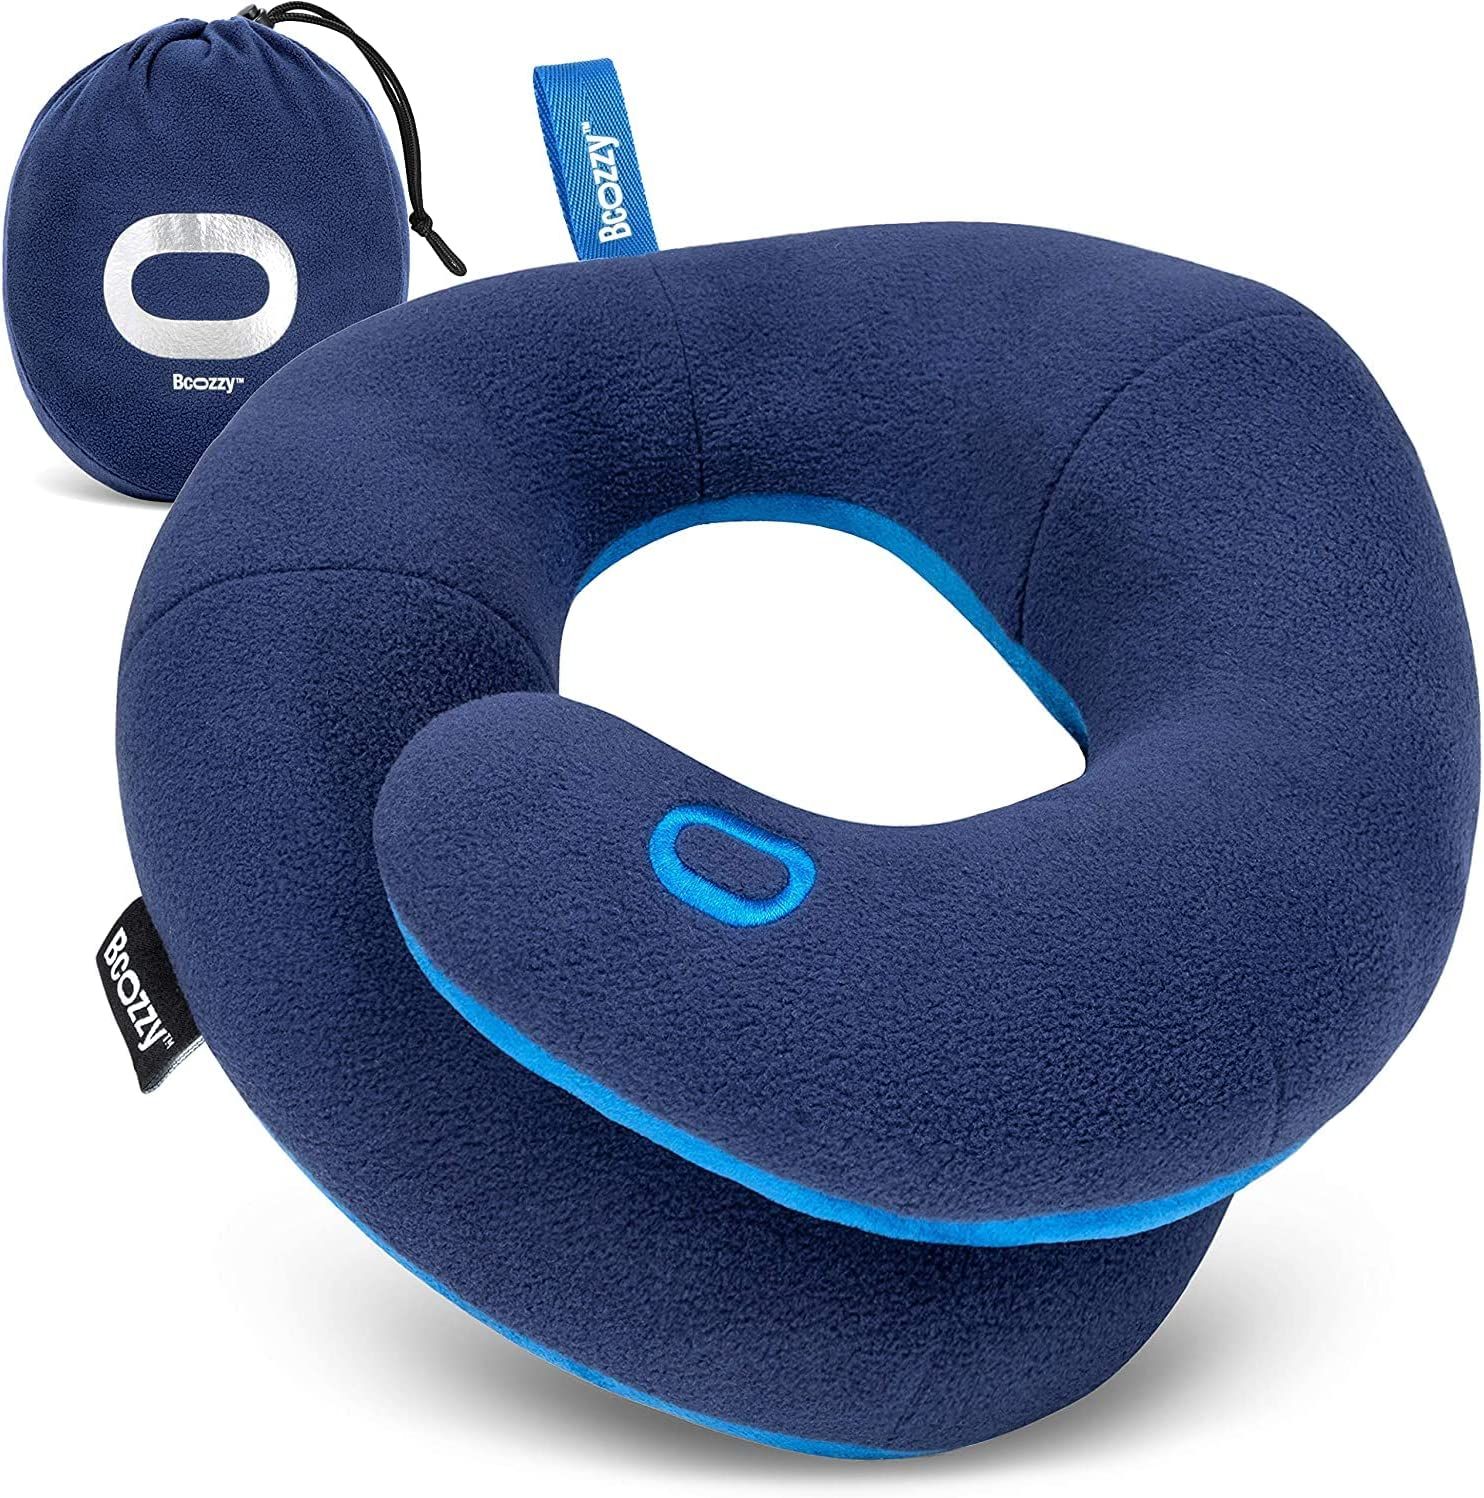 BCOZZY 3-7 Y/O Kids Travel Pillow for Car & Airplane, Soft Kids Neck Pillow for Traveling in Car ... | Amazon (US)